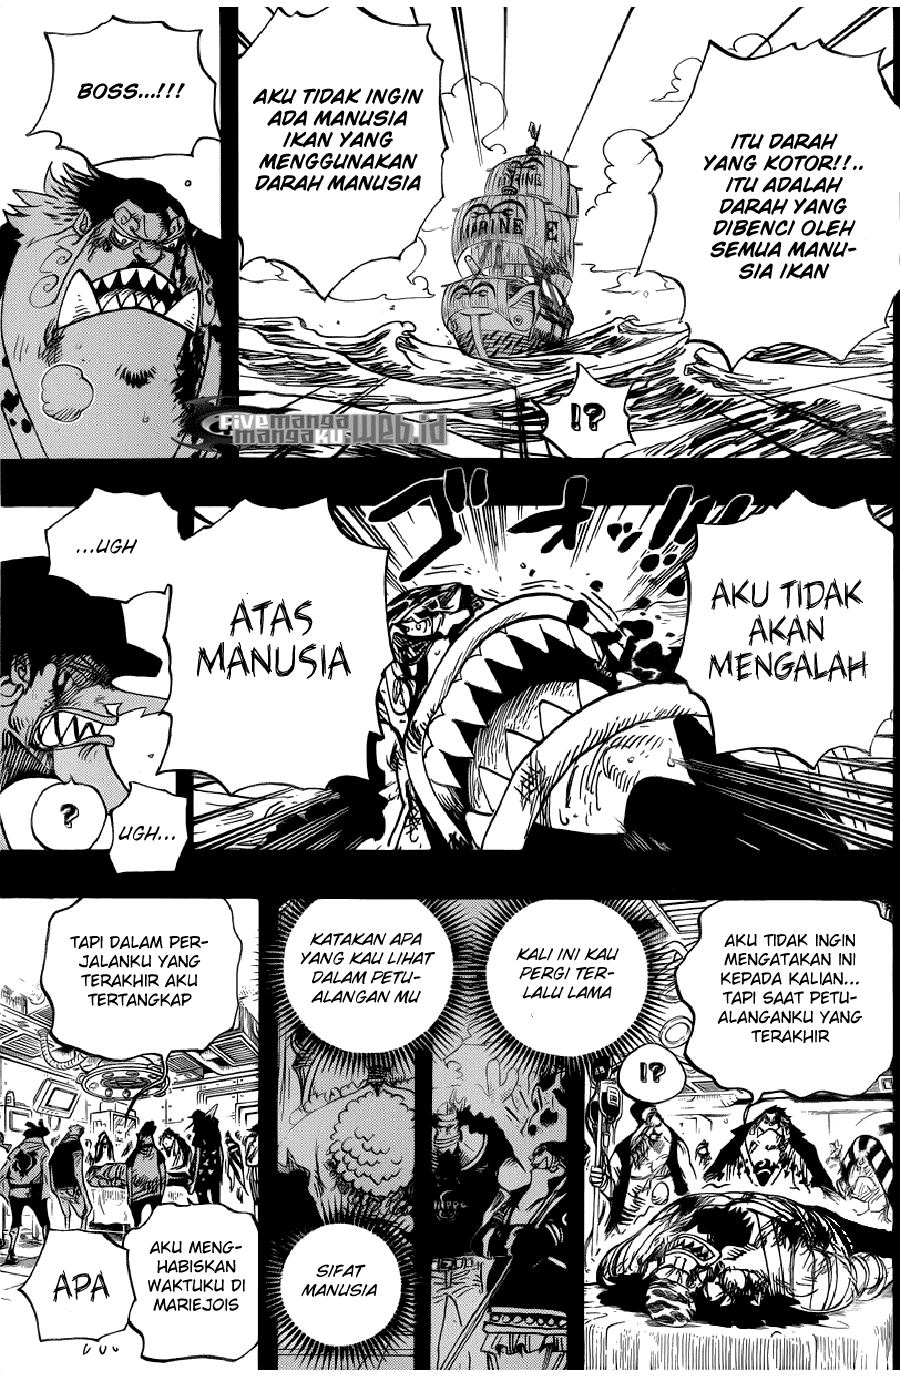 One Piece Chapter 623 – Si Bajak Laut Fisher Tiger - 149